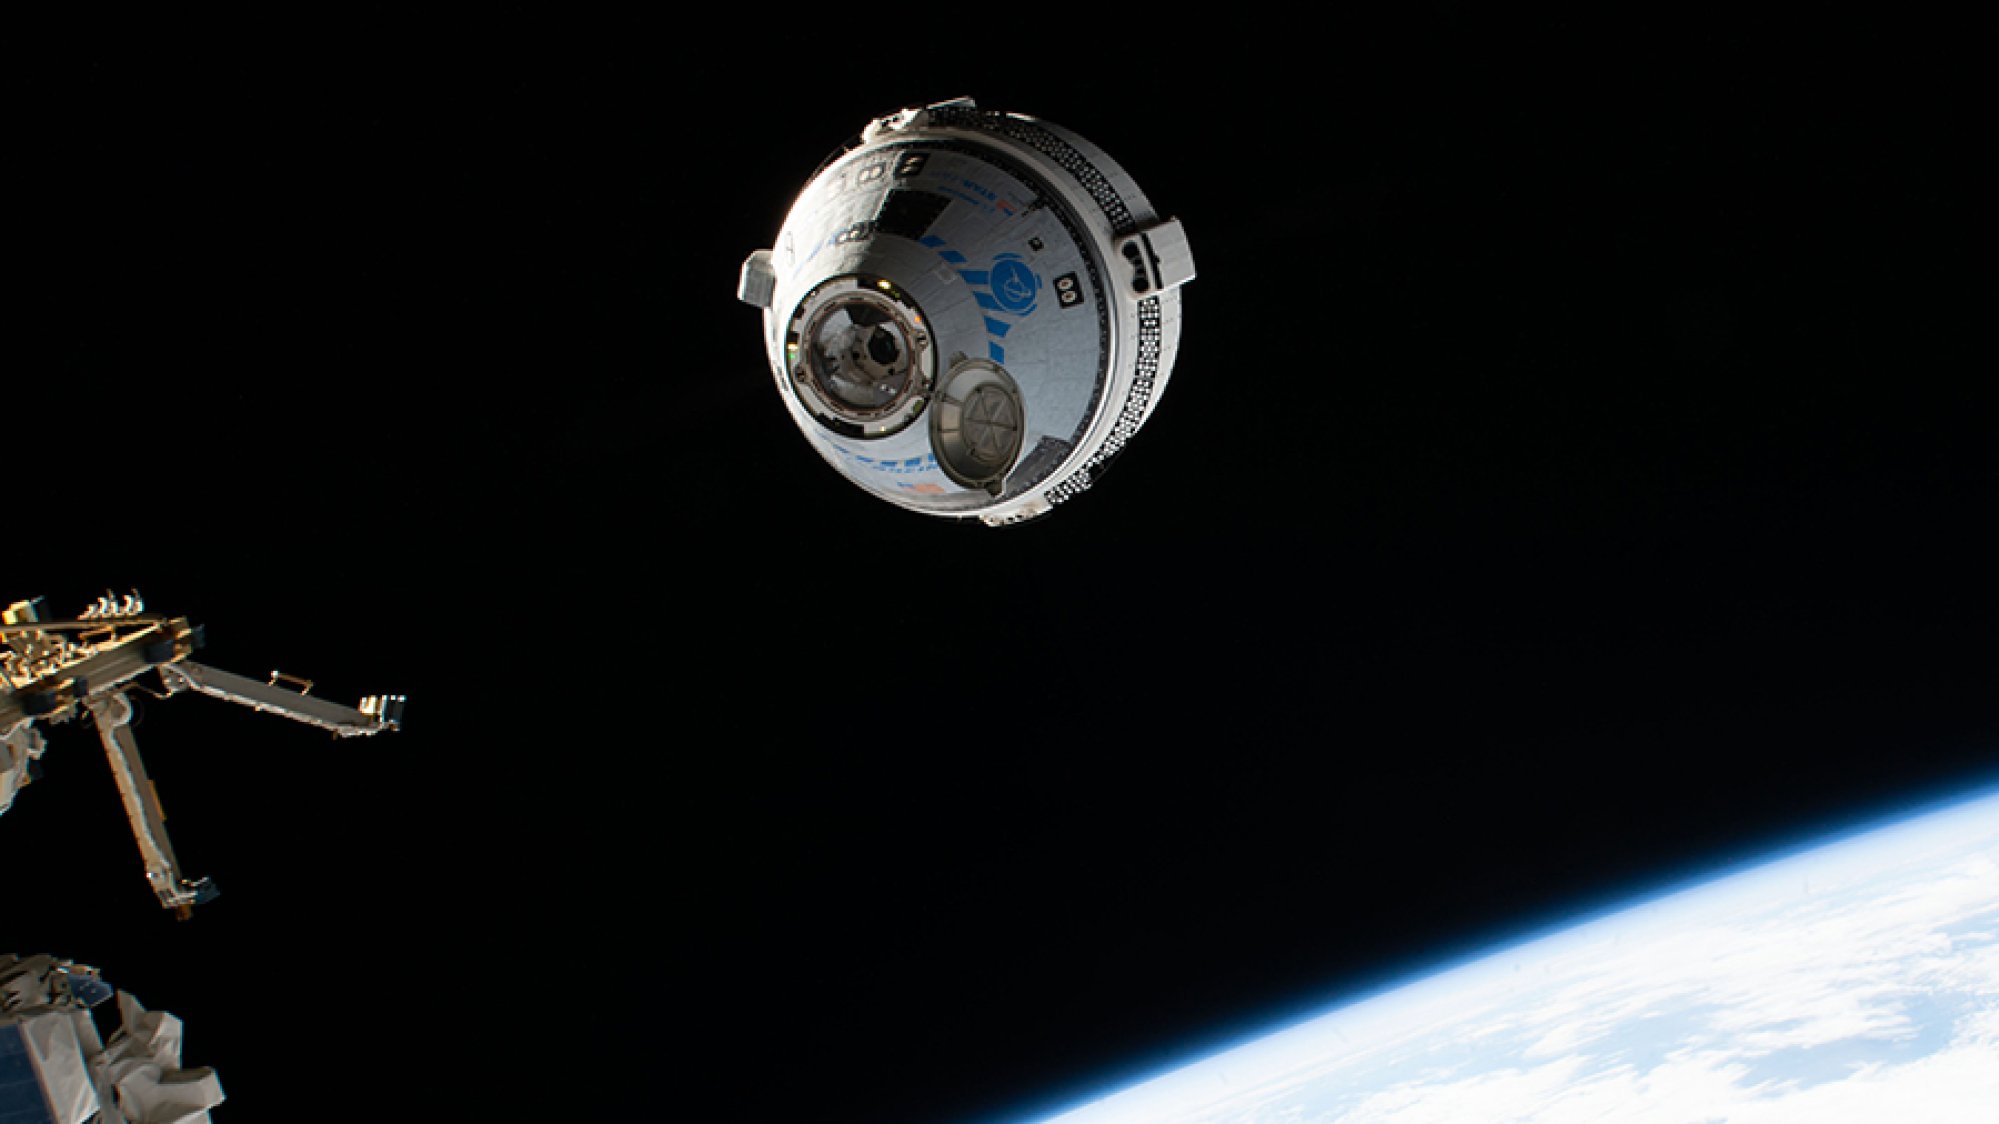 Boeing Starliner approaching the International Space Station